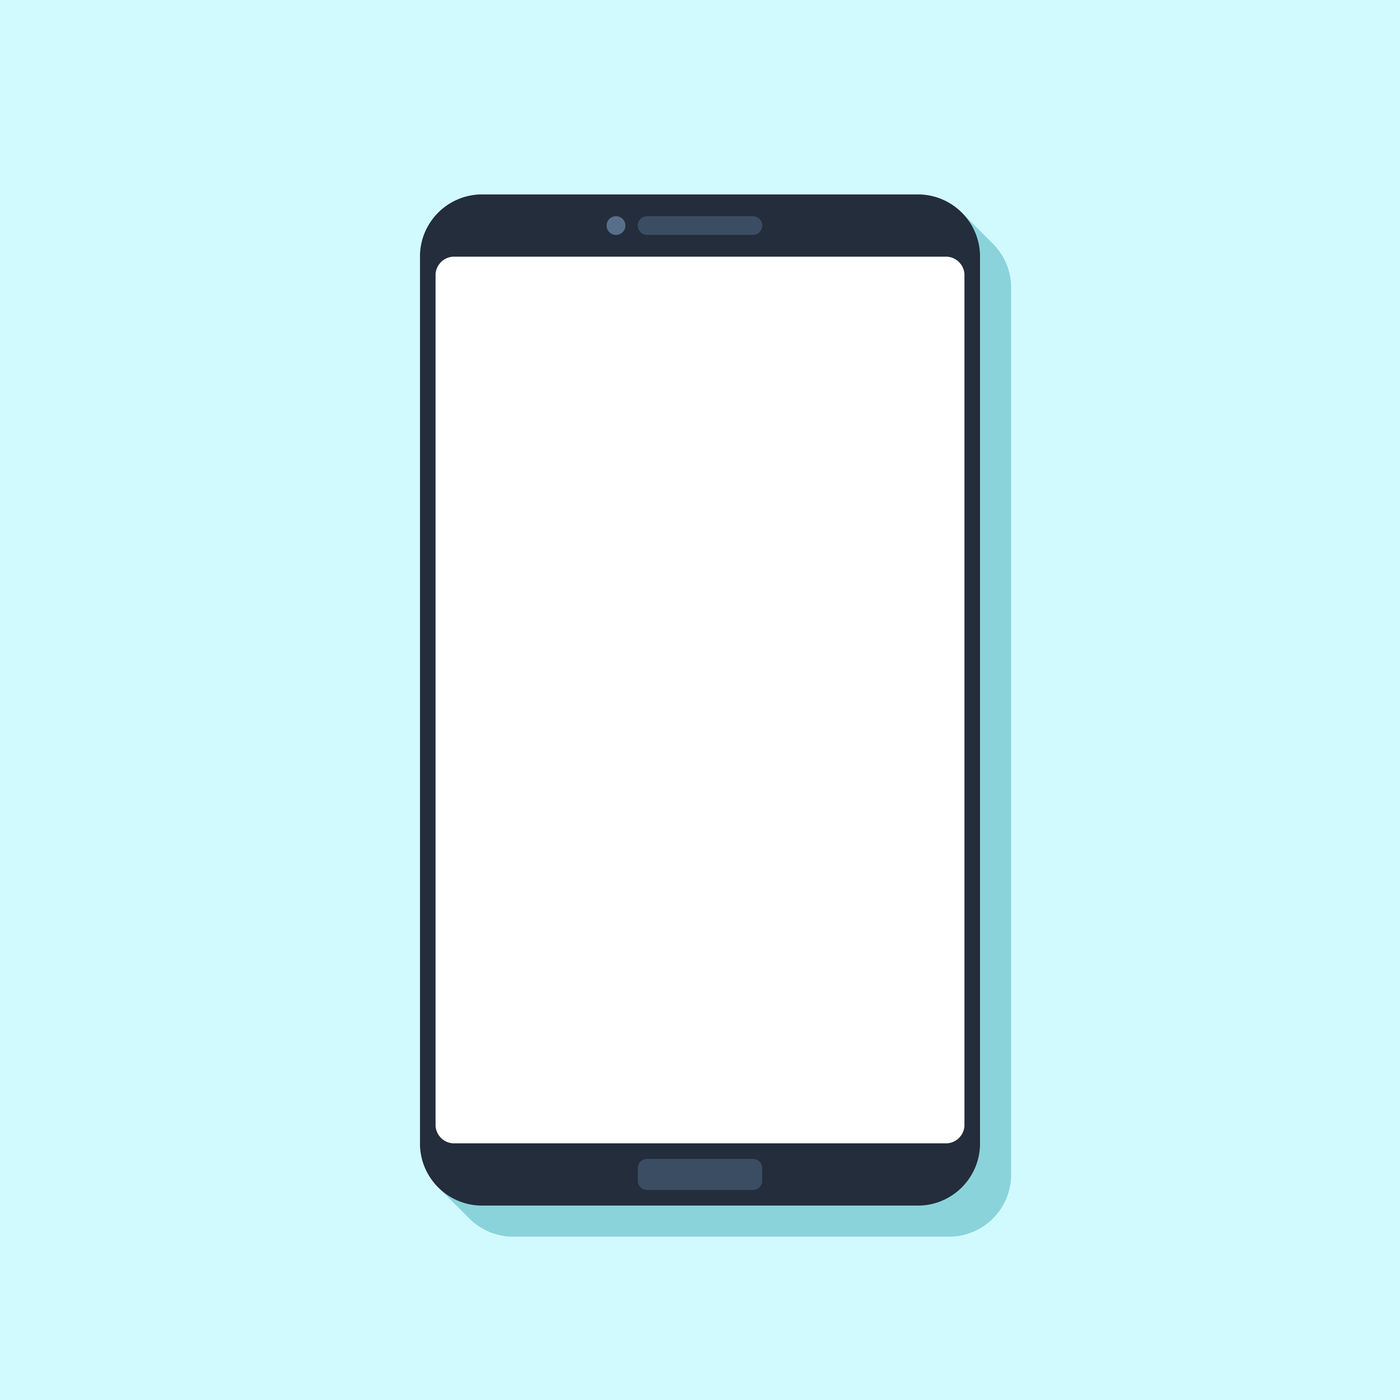 flat-mobile-phone-device-modern-smartphone-template-for-applications